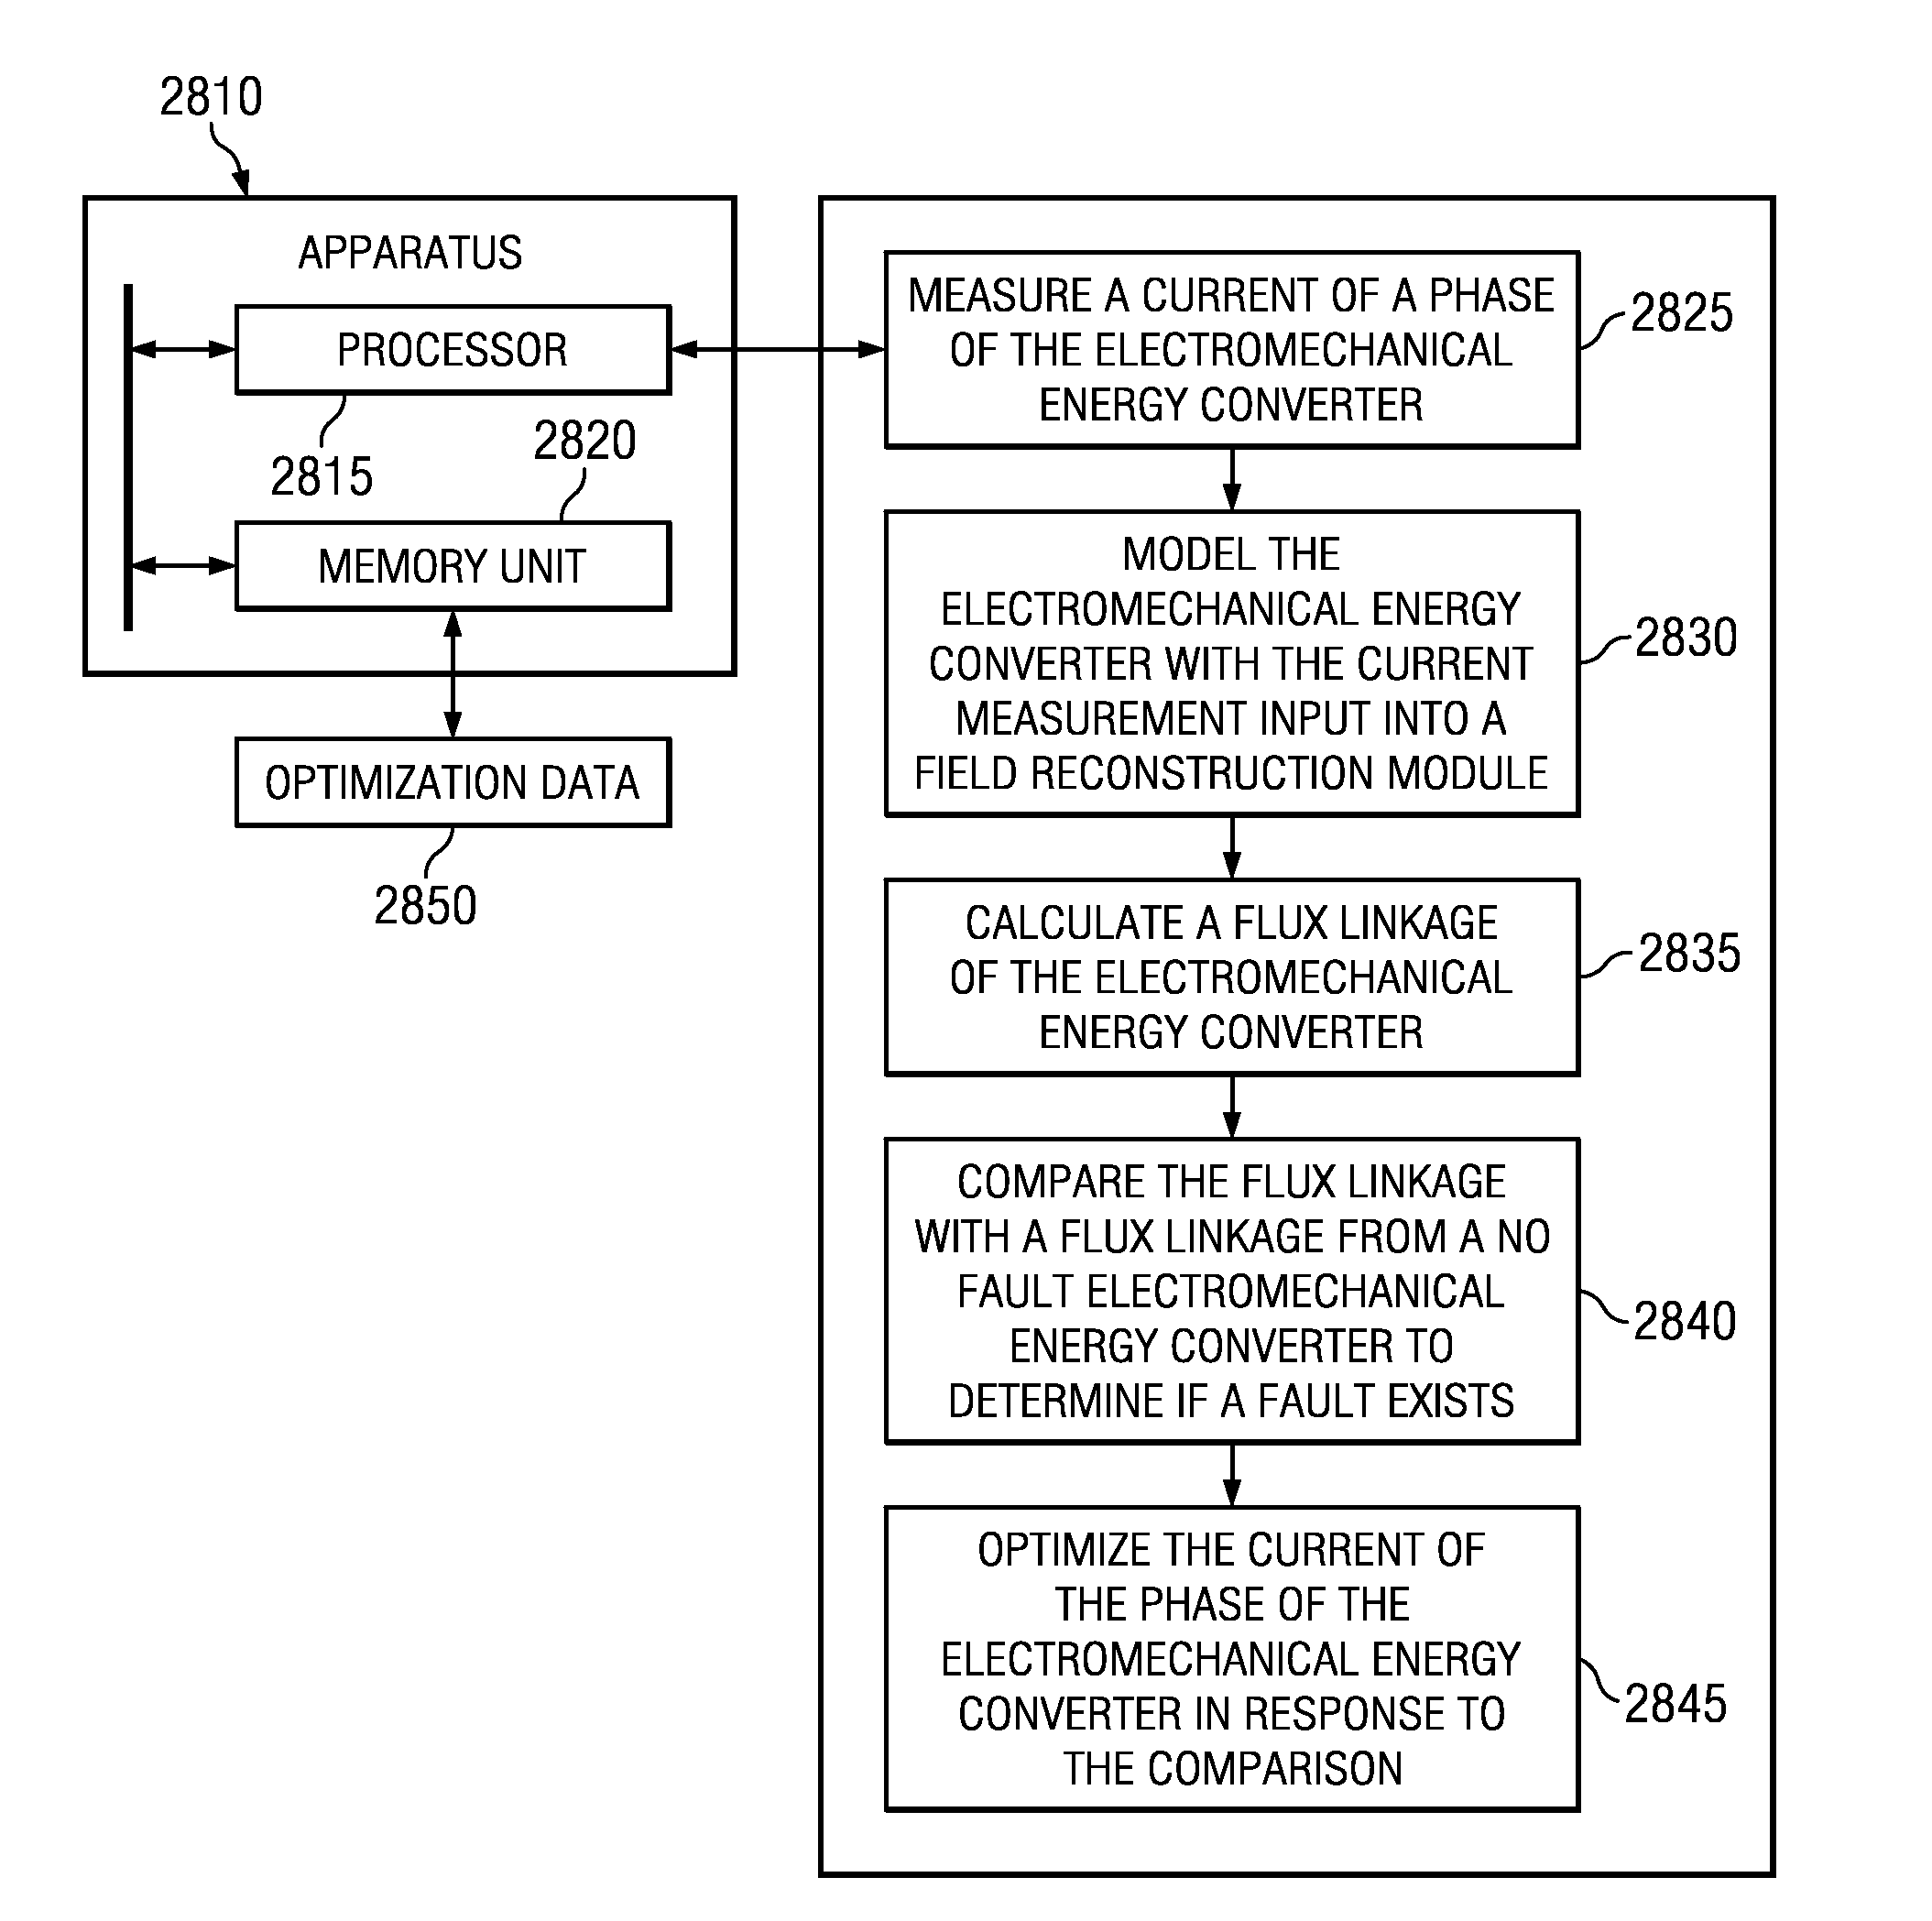 Methods and apparatuses for fault management in permanent magnet synchronous machines using the field reconstruction method